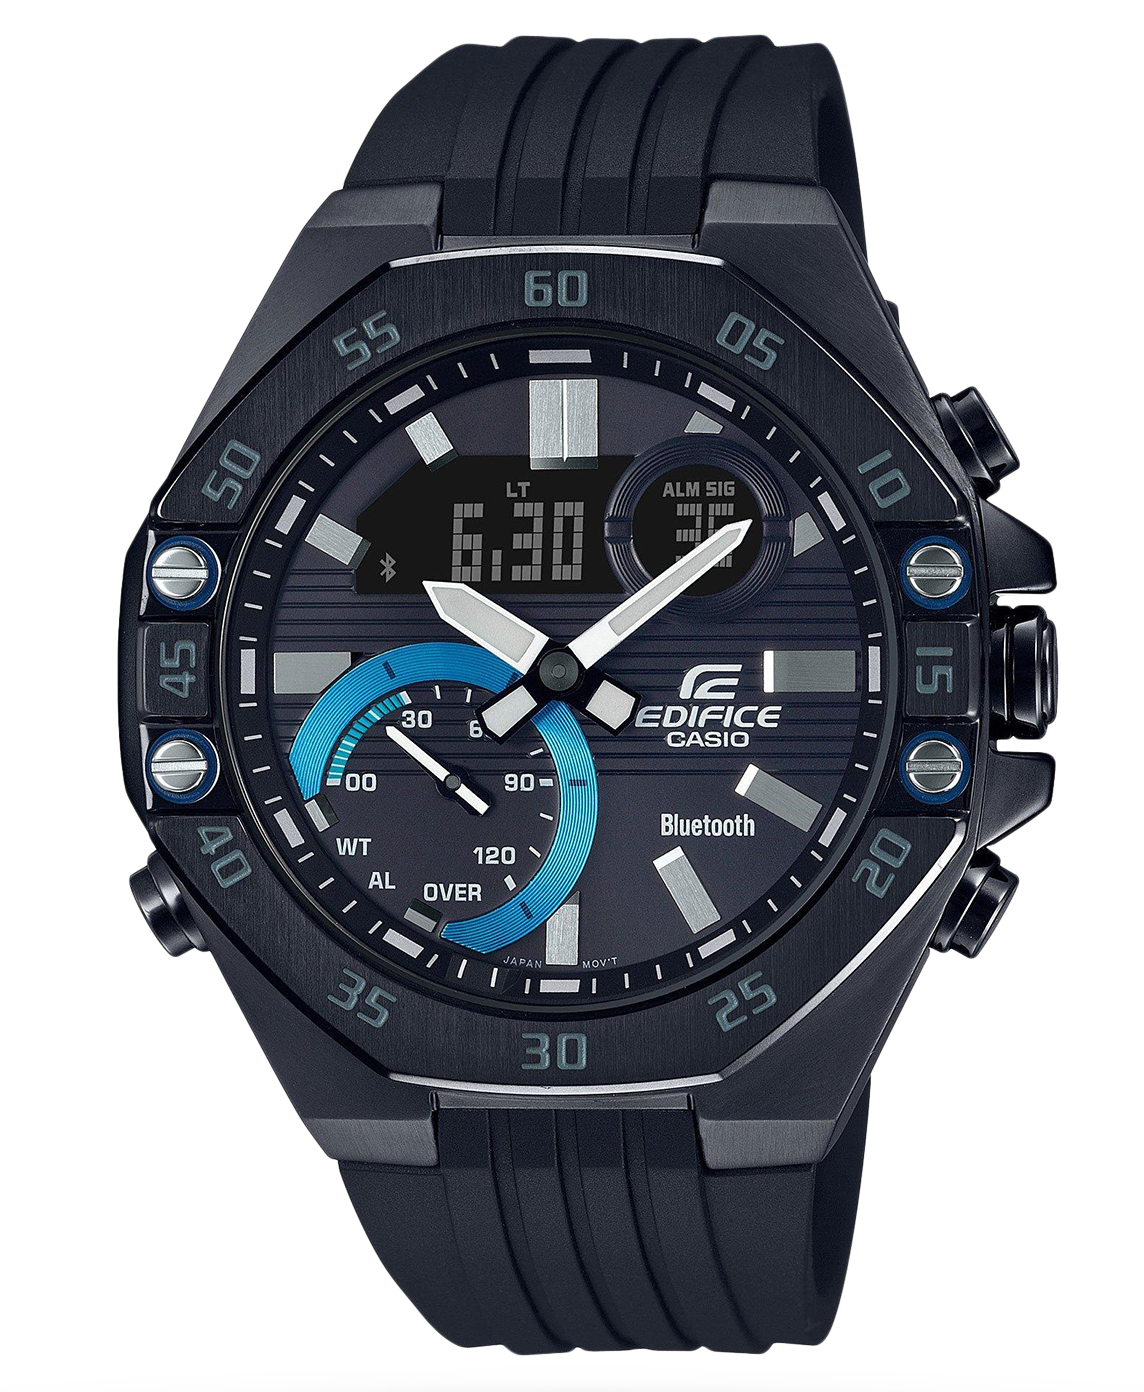 This Casio Edifice Analogue-Digital Watch for Men is the perfect timepiece to wear or to gift. It's Black 45 mm Round case combined with the comfortable Black Plastic will ensure you enjoy this stunning timepiece without any compromise. Operated by a high quality Quartz movement and water resistant to 10 bars, your watch will keep ticking. Fashionable Sporty Design, Perfect for all kind of sports, indoor and outdoor activities or daily use -The watch has a Calendar function: Day-Date, Bluetooth, Stop Watch, Worldtime, Alarm High quality 21 cm length and 23 mm width Black Plastic strap with a Buckle Case diameter: 45 mm,case thickness: 13 mm, case colour: Black and dial colour: Black